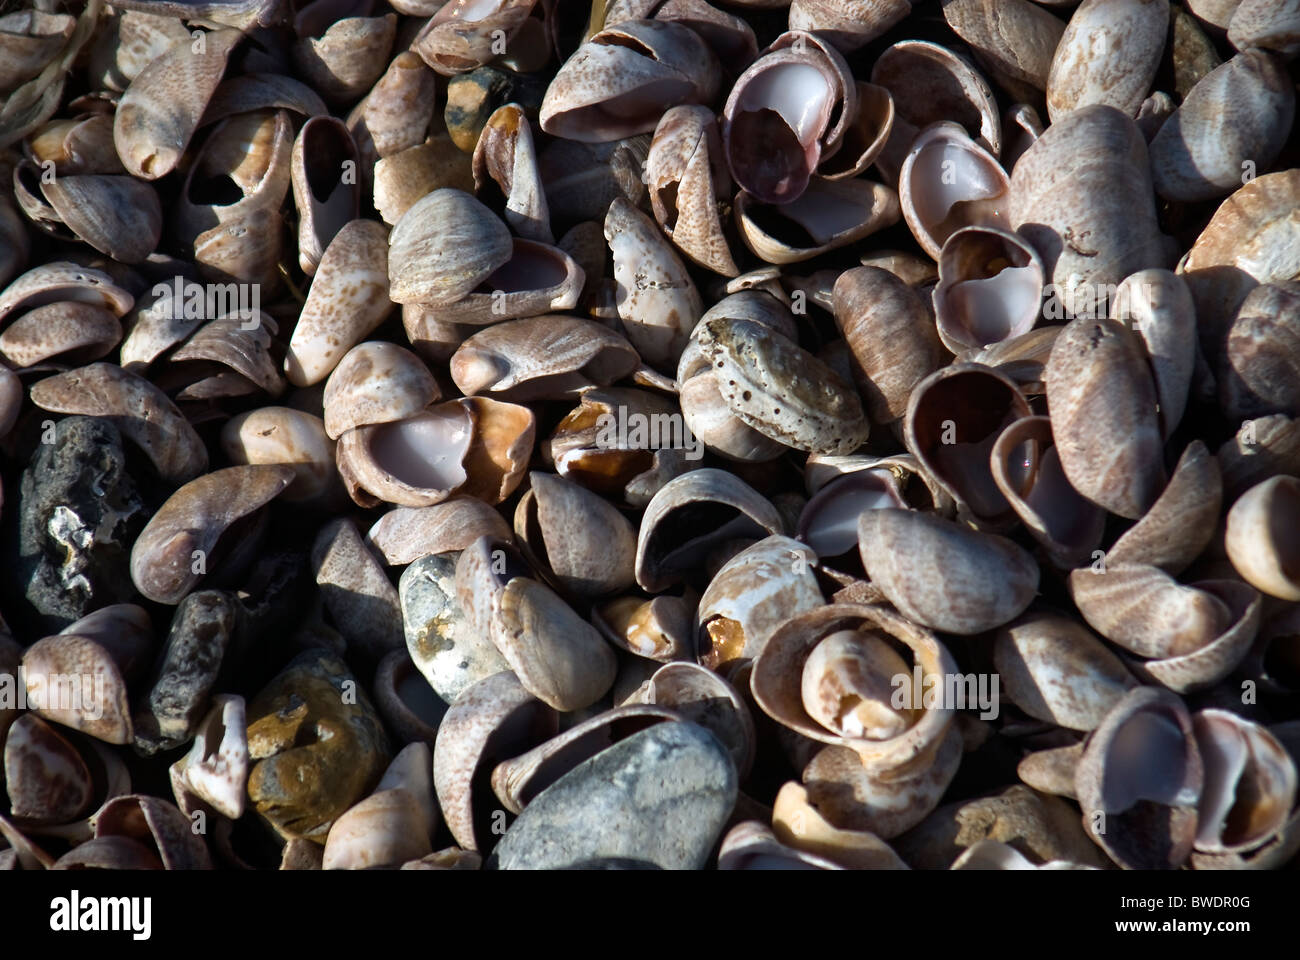 Large number of slipper limpet shells on Pagham Beach, West Sussex, UK Stock Photo